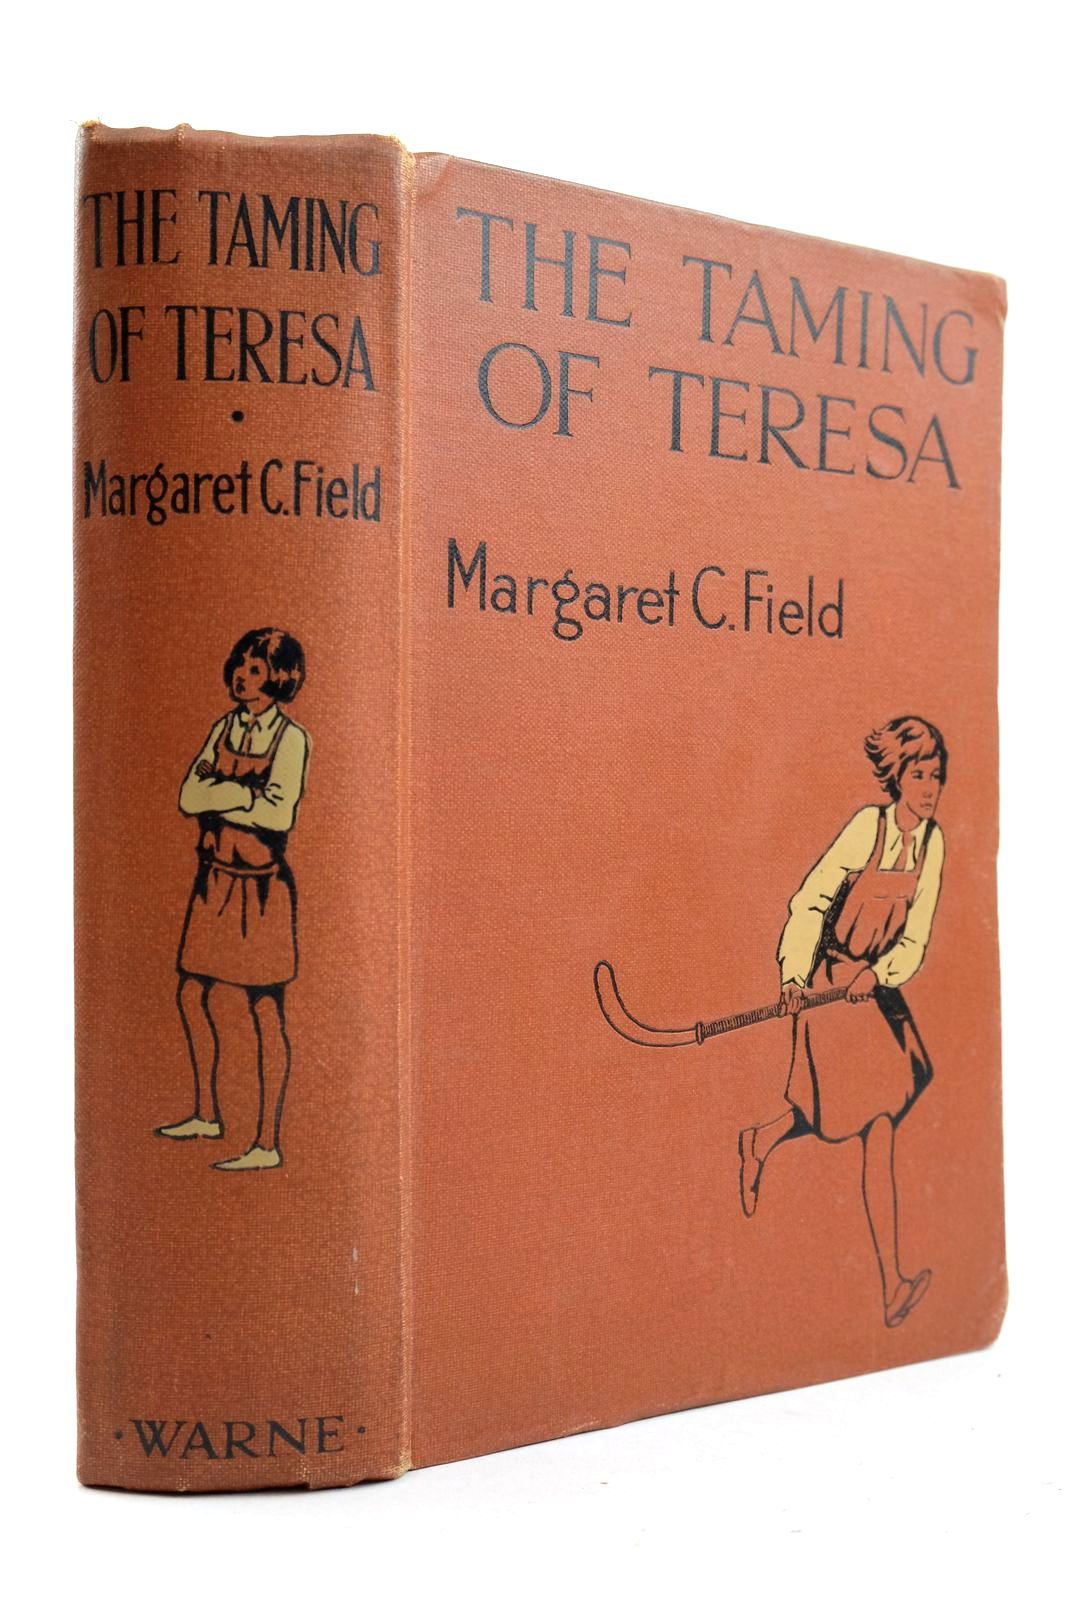 Photo of THE TAMING OF TERESA written by Field, Margaret published by Frederick Warne &amp; Co Ltd. (STOCK CODE: 2133075)  for sale by Stella & Rose's Books